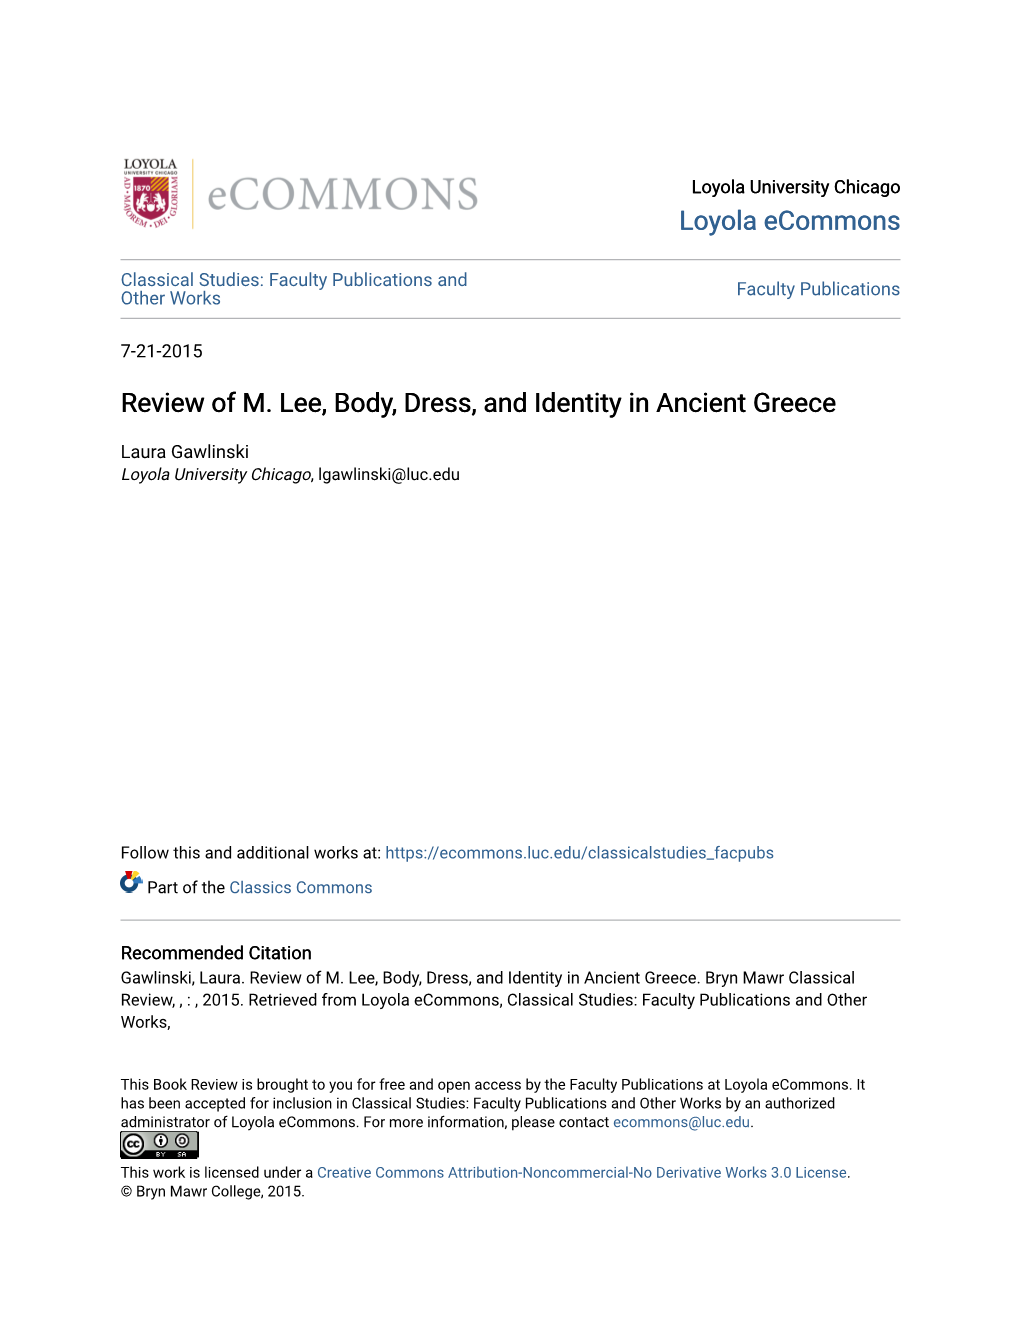 Review of M. Lee, Body, Dress, and Identity in Ancient Greece